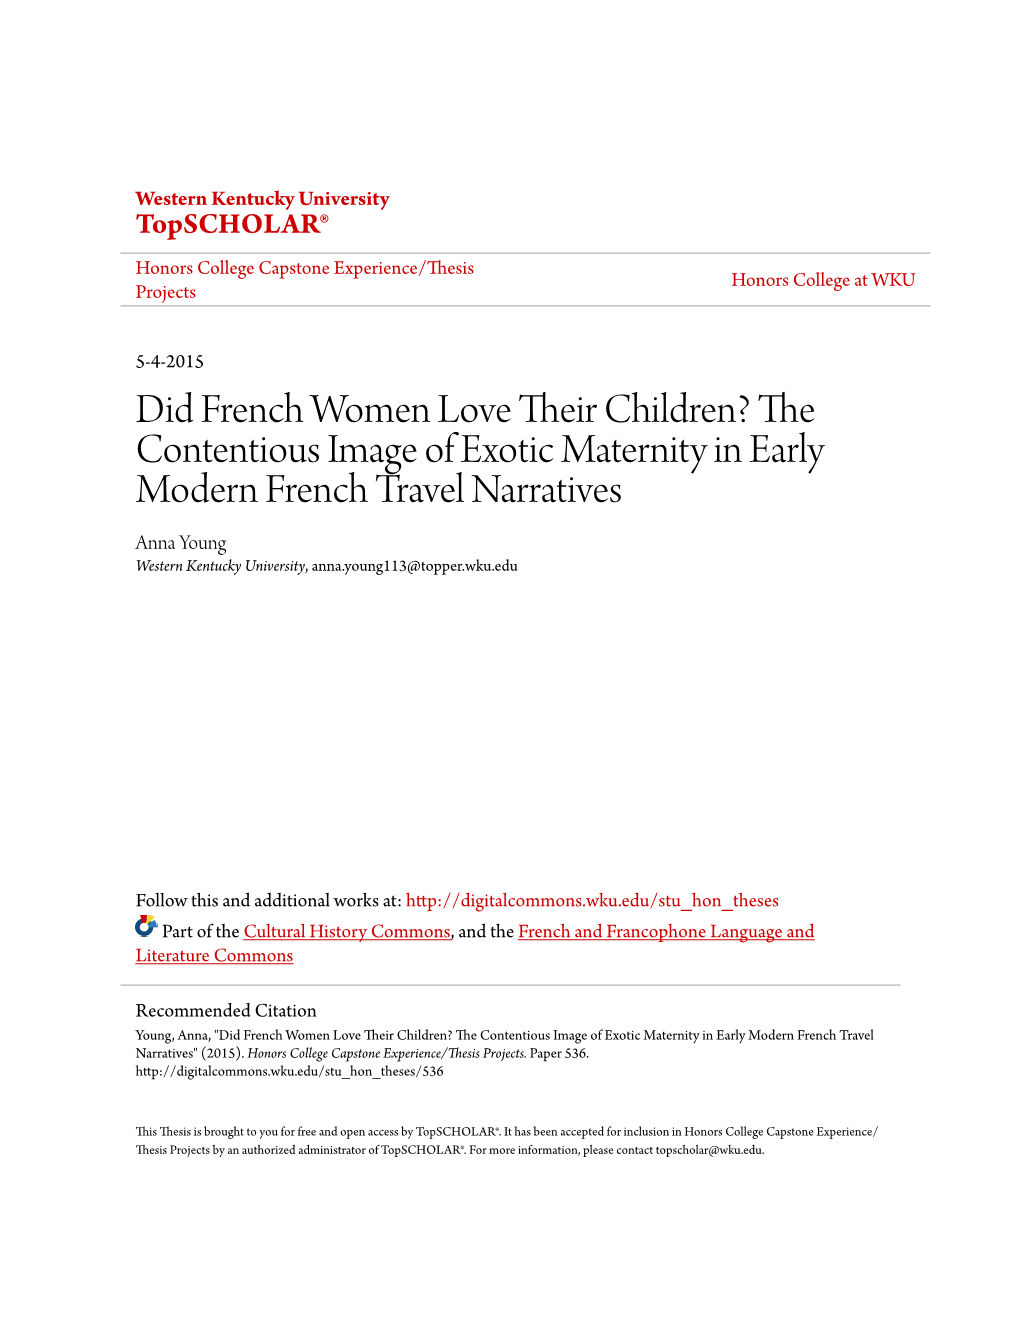 The Contentious Image of Exotic Maternity in Early Modern French Travel Narratives Anna Young Western Kentucky University, Anna.Young113@Topper.Wku.Edu